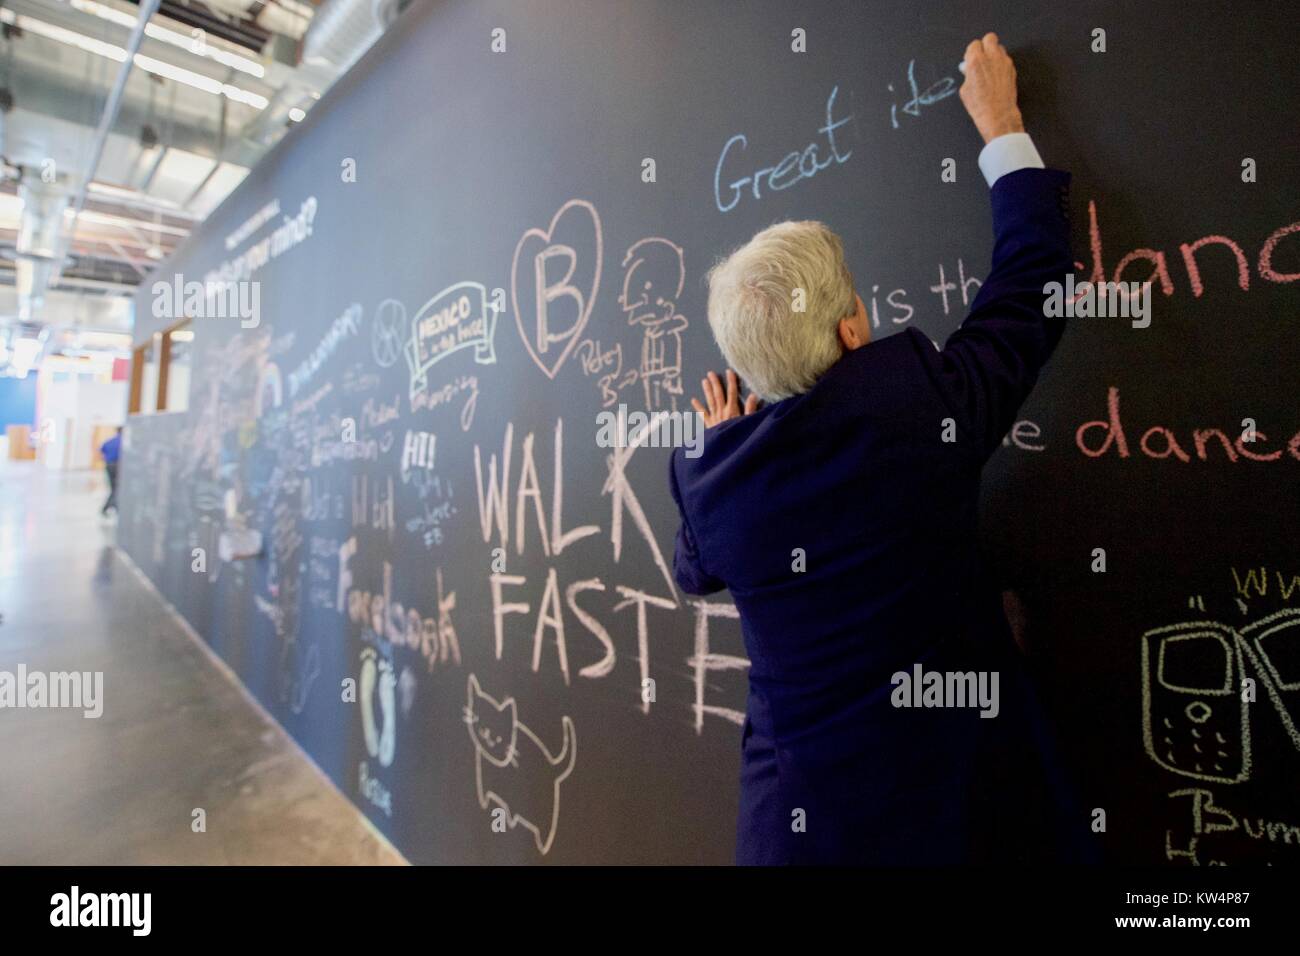 US Secretary of State John Kerry signs a message on the Facebook wall at their new headquarters in Menlo Park, California, before meeting with CEO Mark Zuckerberg, June 23, 2016. Earlier, Secretary Kerry delivered remarks at the Opening Plenary of the 2016 Global Entrepreneurship Summit and toured the Innovation Marketplace on the campus of Stanford University. Image courtesy US Department of State. Stock Photo